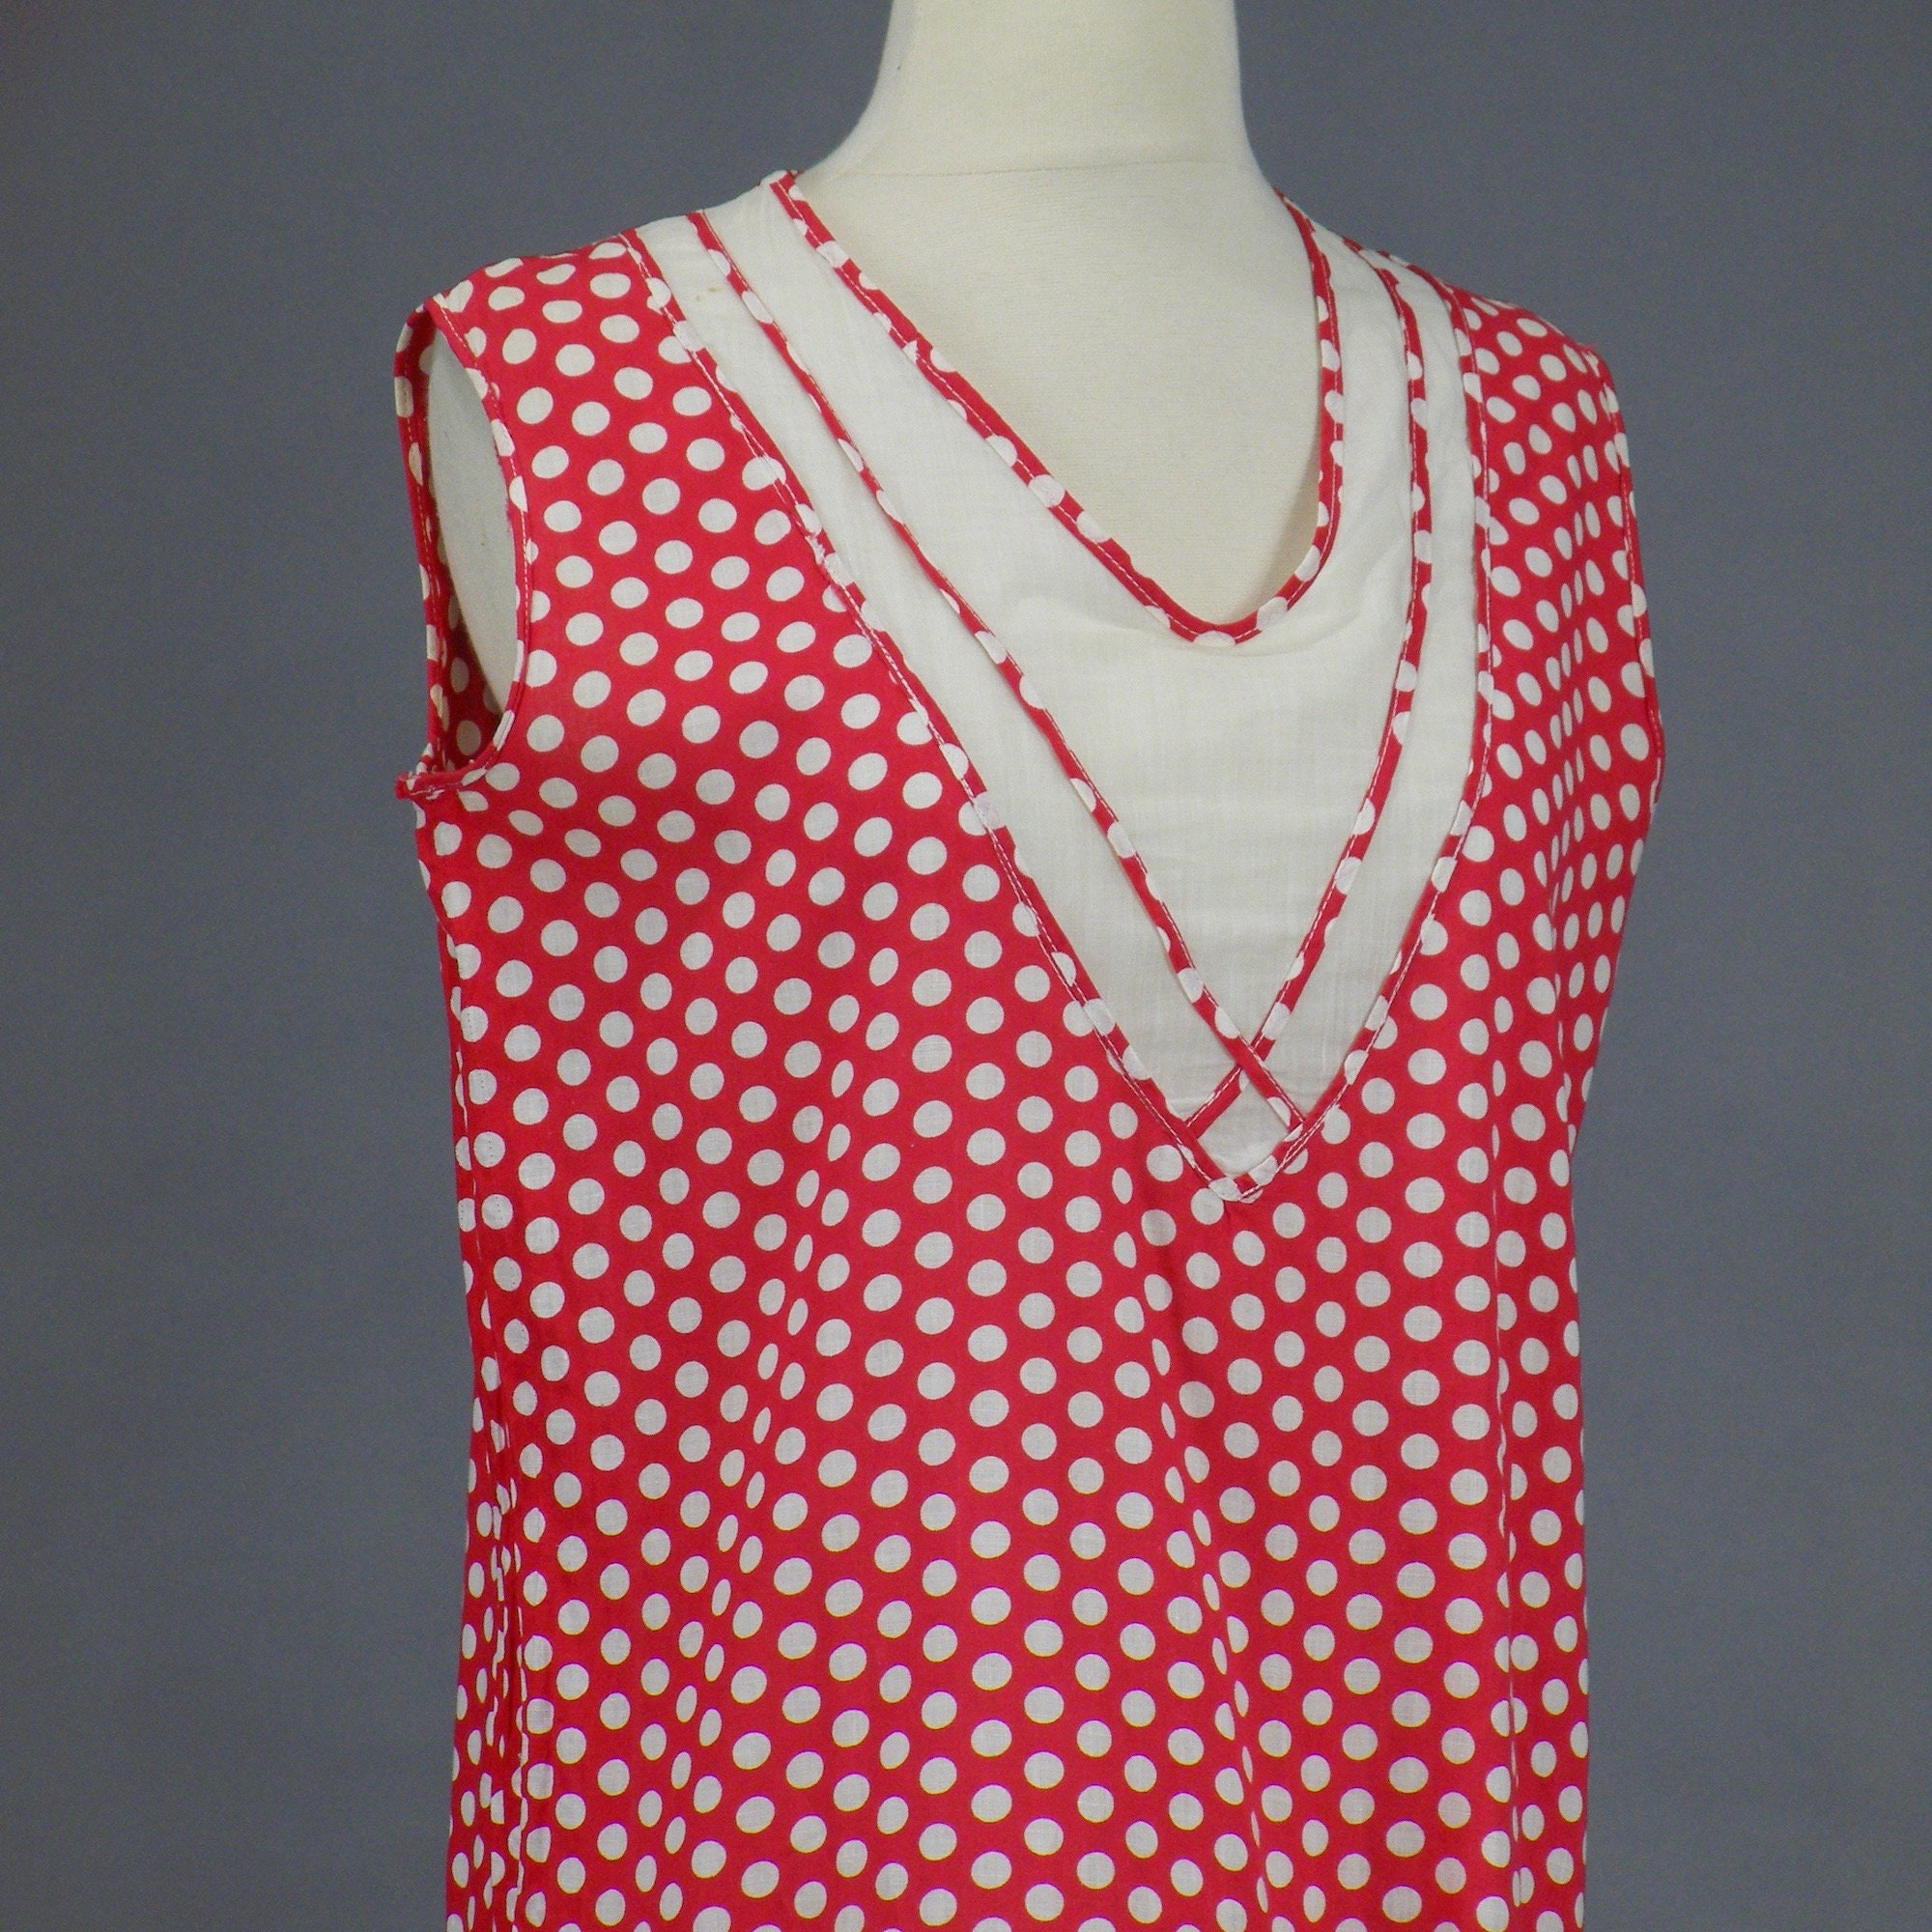 Vintage 1920's Red White Cotton Polka Dot Day Dress with Godets, S - M